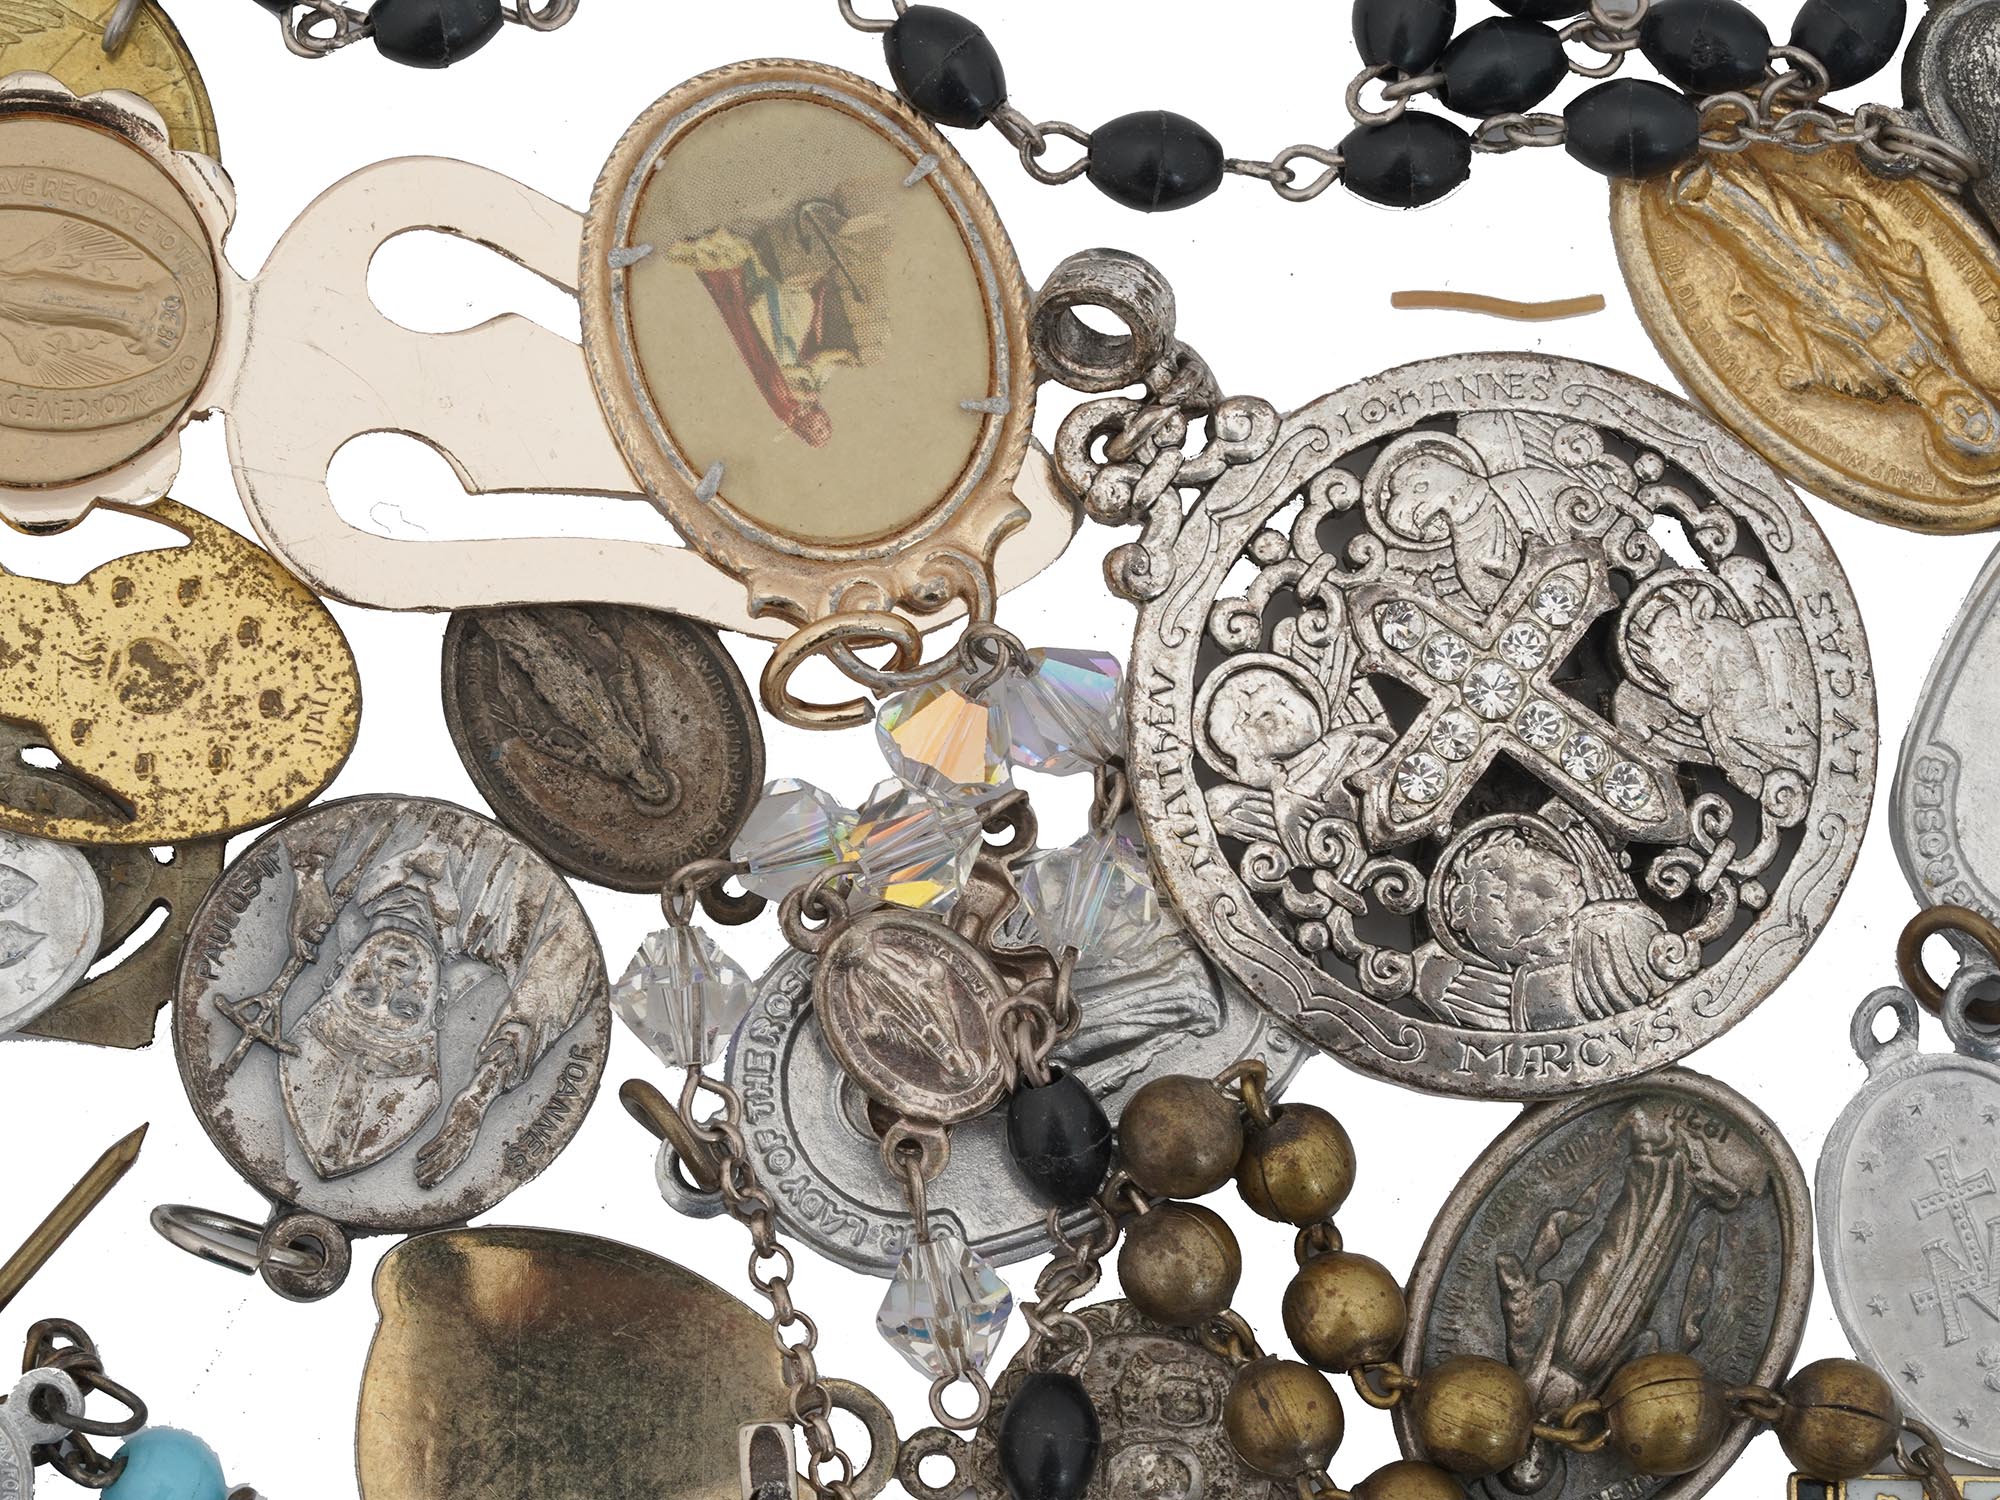 LOT OF VINTAGE RELIGIOUS CATHOLIC ITEMS AND BEADS PIC-6